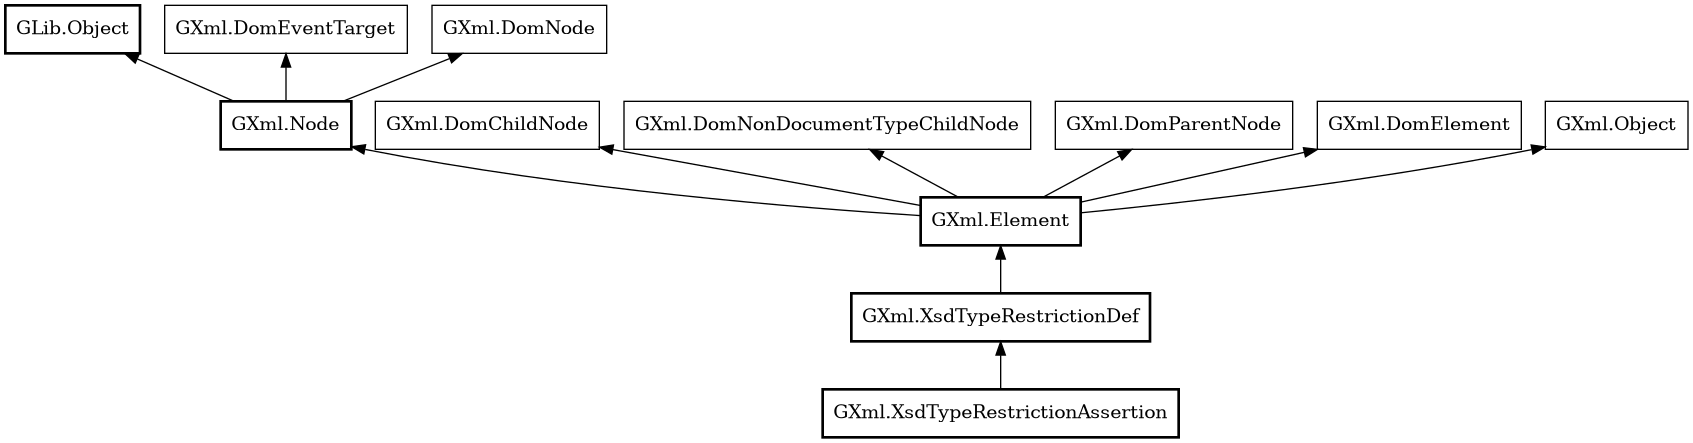 Object hierarchy for XsdTypeRestrictionAssertion